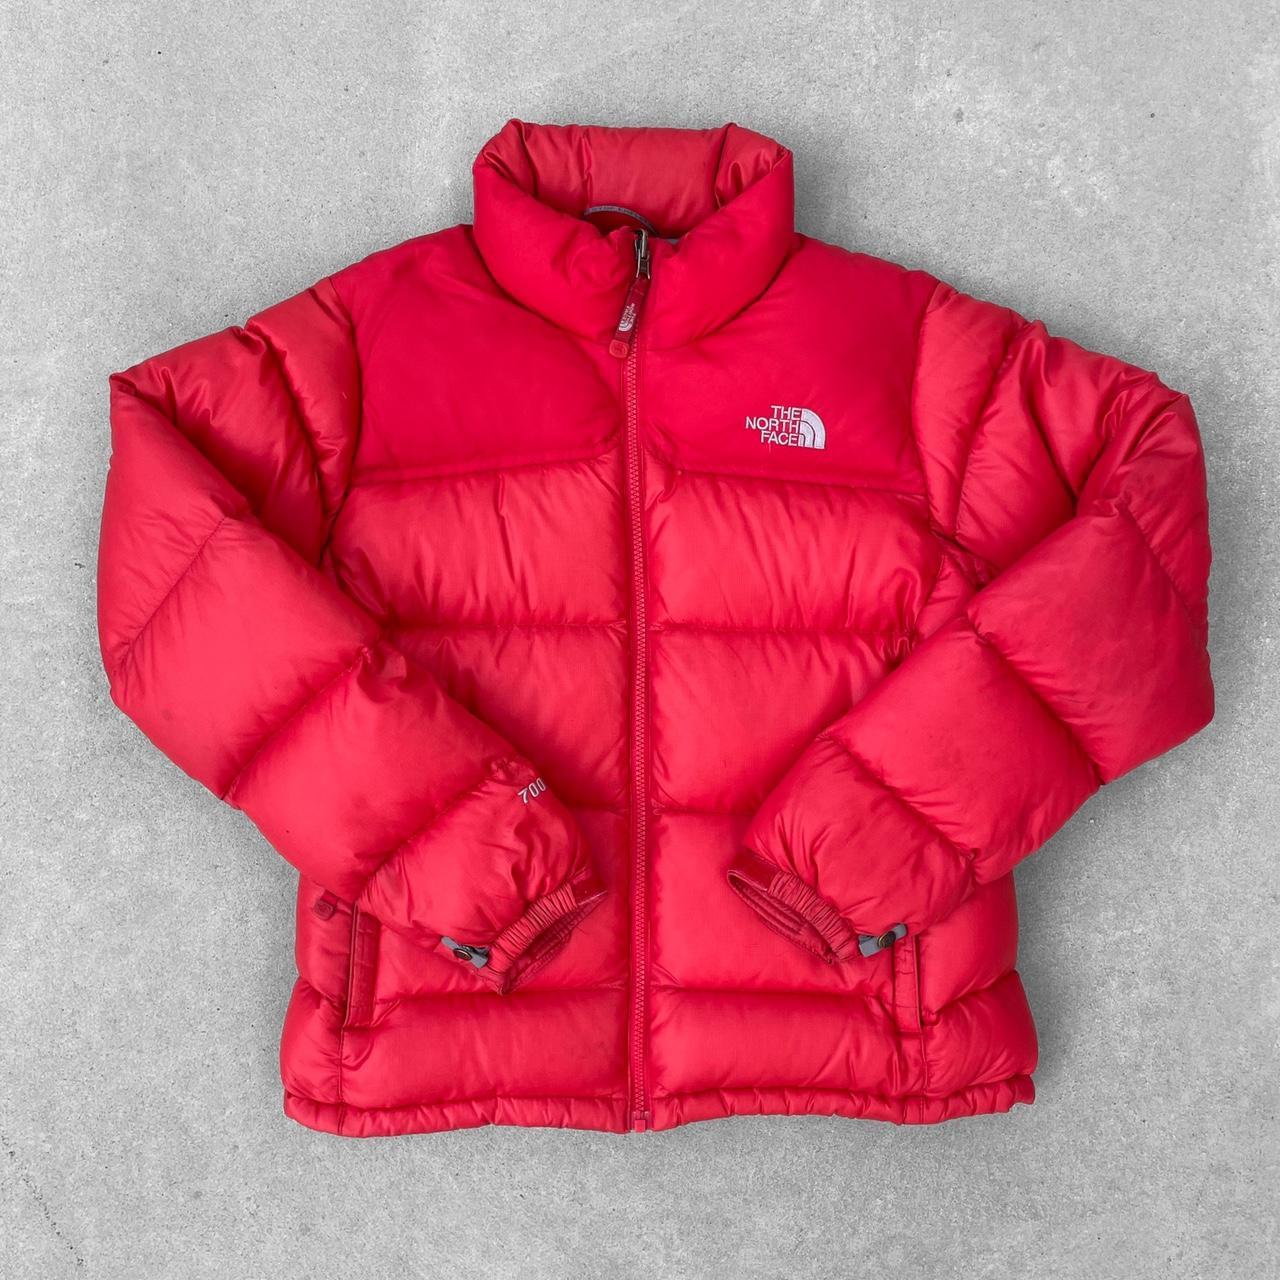 Vintage The North Face 700 Puffer Jacket in Red and... - Depop